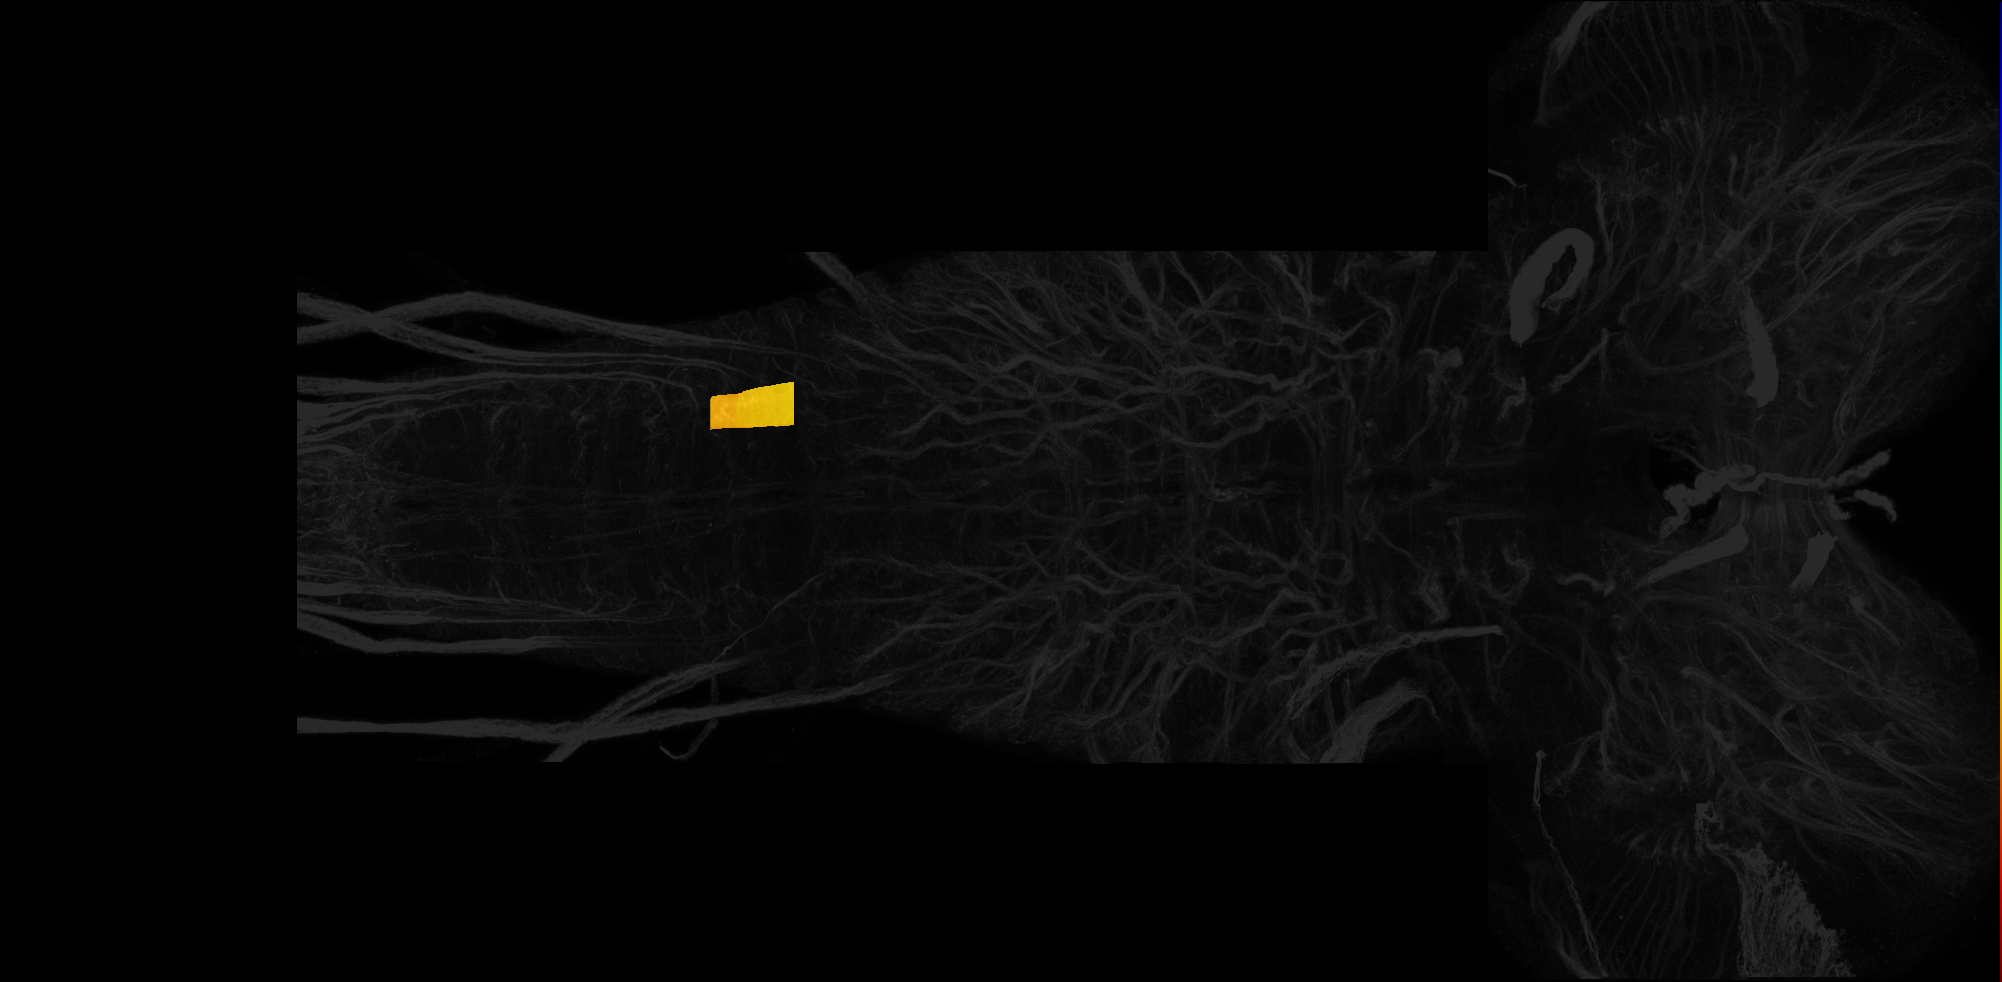 left centrolateral neuropil of A4 on L3 CNS template, Wood2018